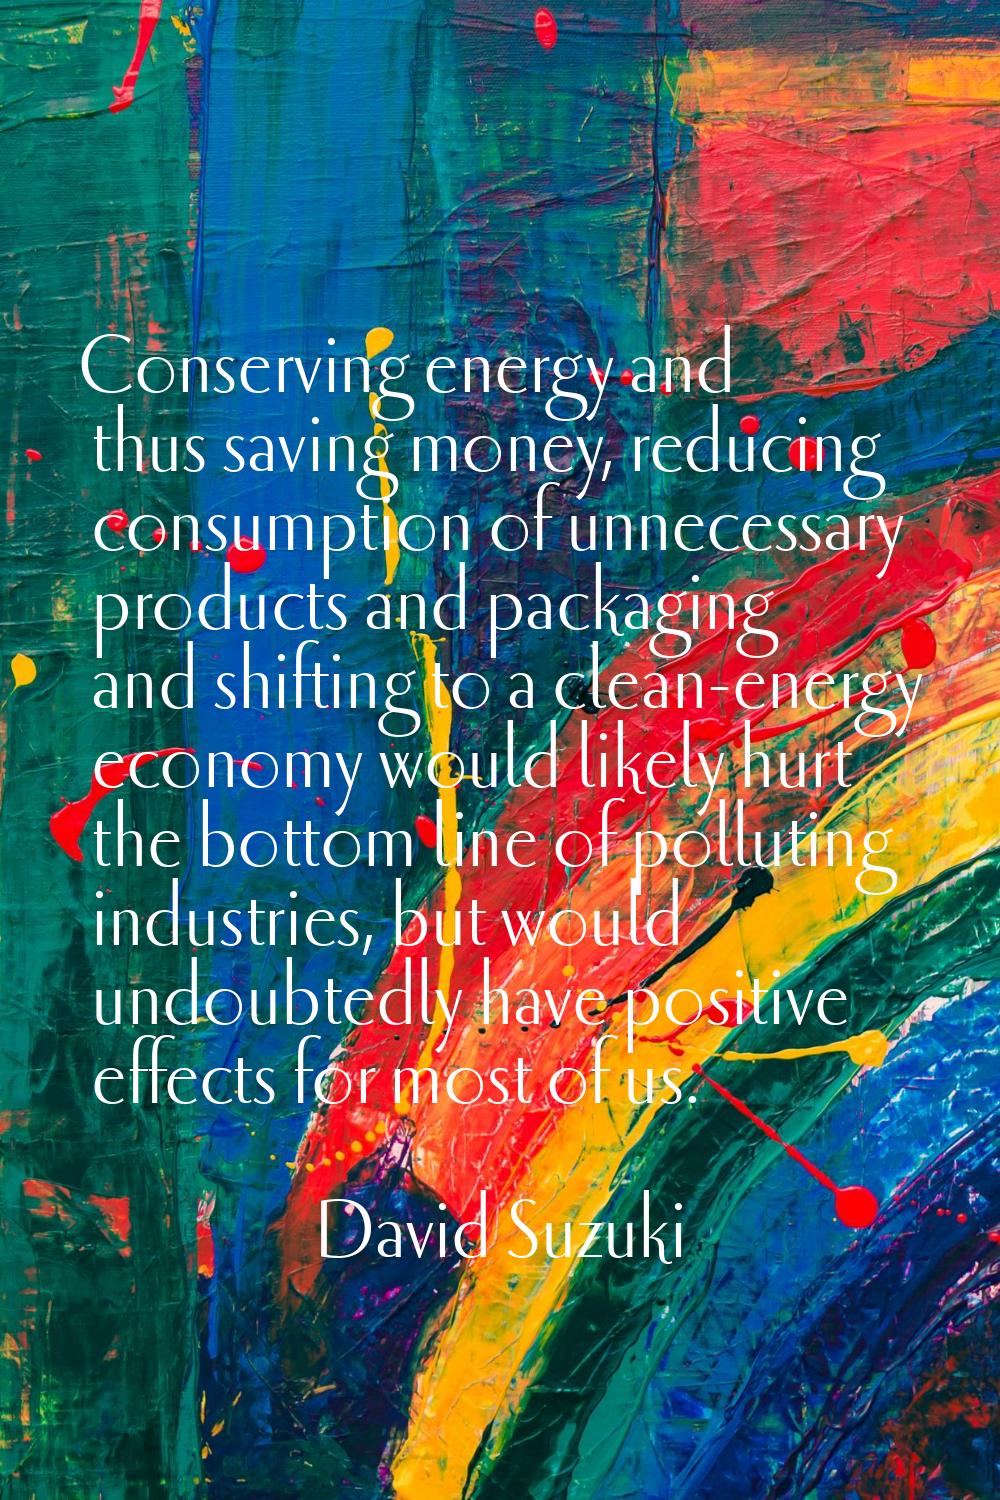 Conserving energy and thus saving money, reducing consumption of unnecessary products and packaging